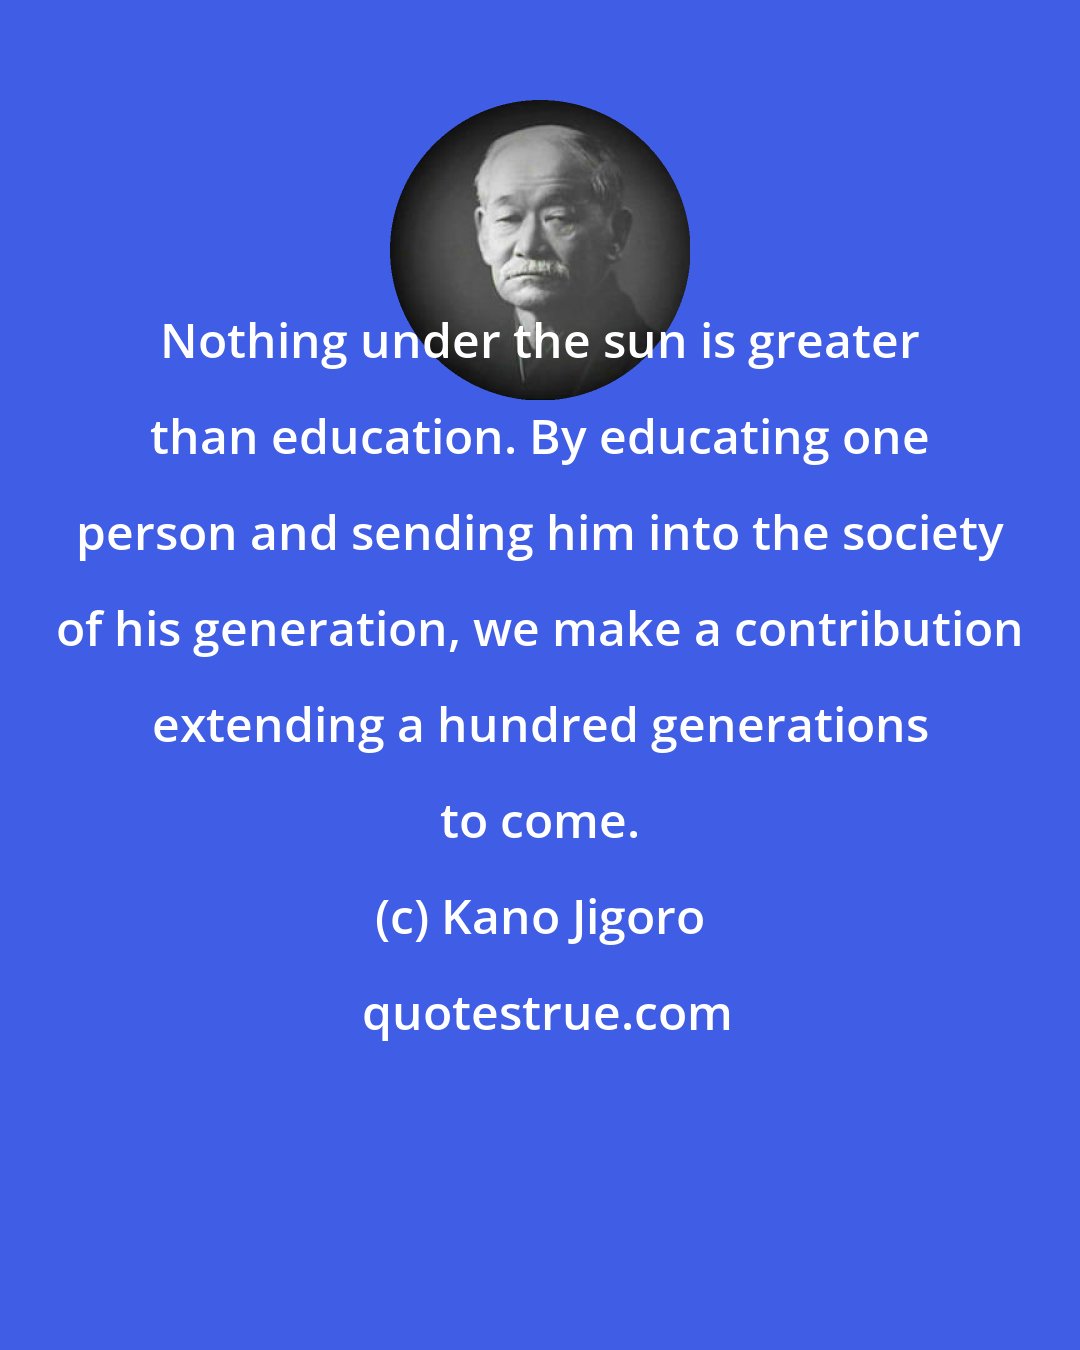 Kano Jigoro: Nothing under the sun is greater than education. By educating one person and sending him into the society of his generation, we make a contribution extending a hundred generations to come.